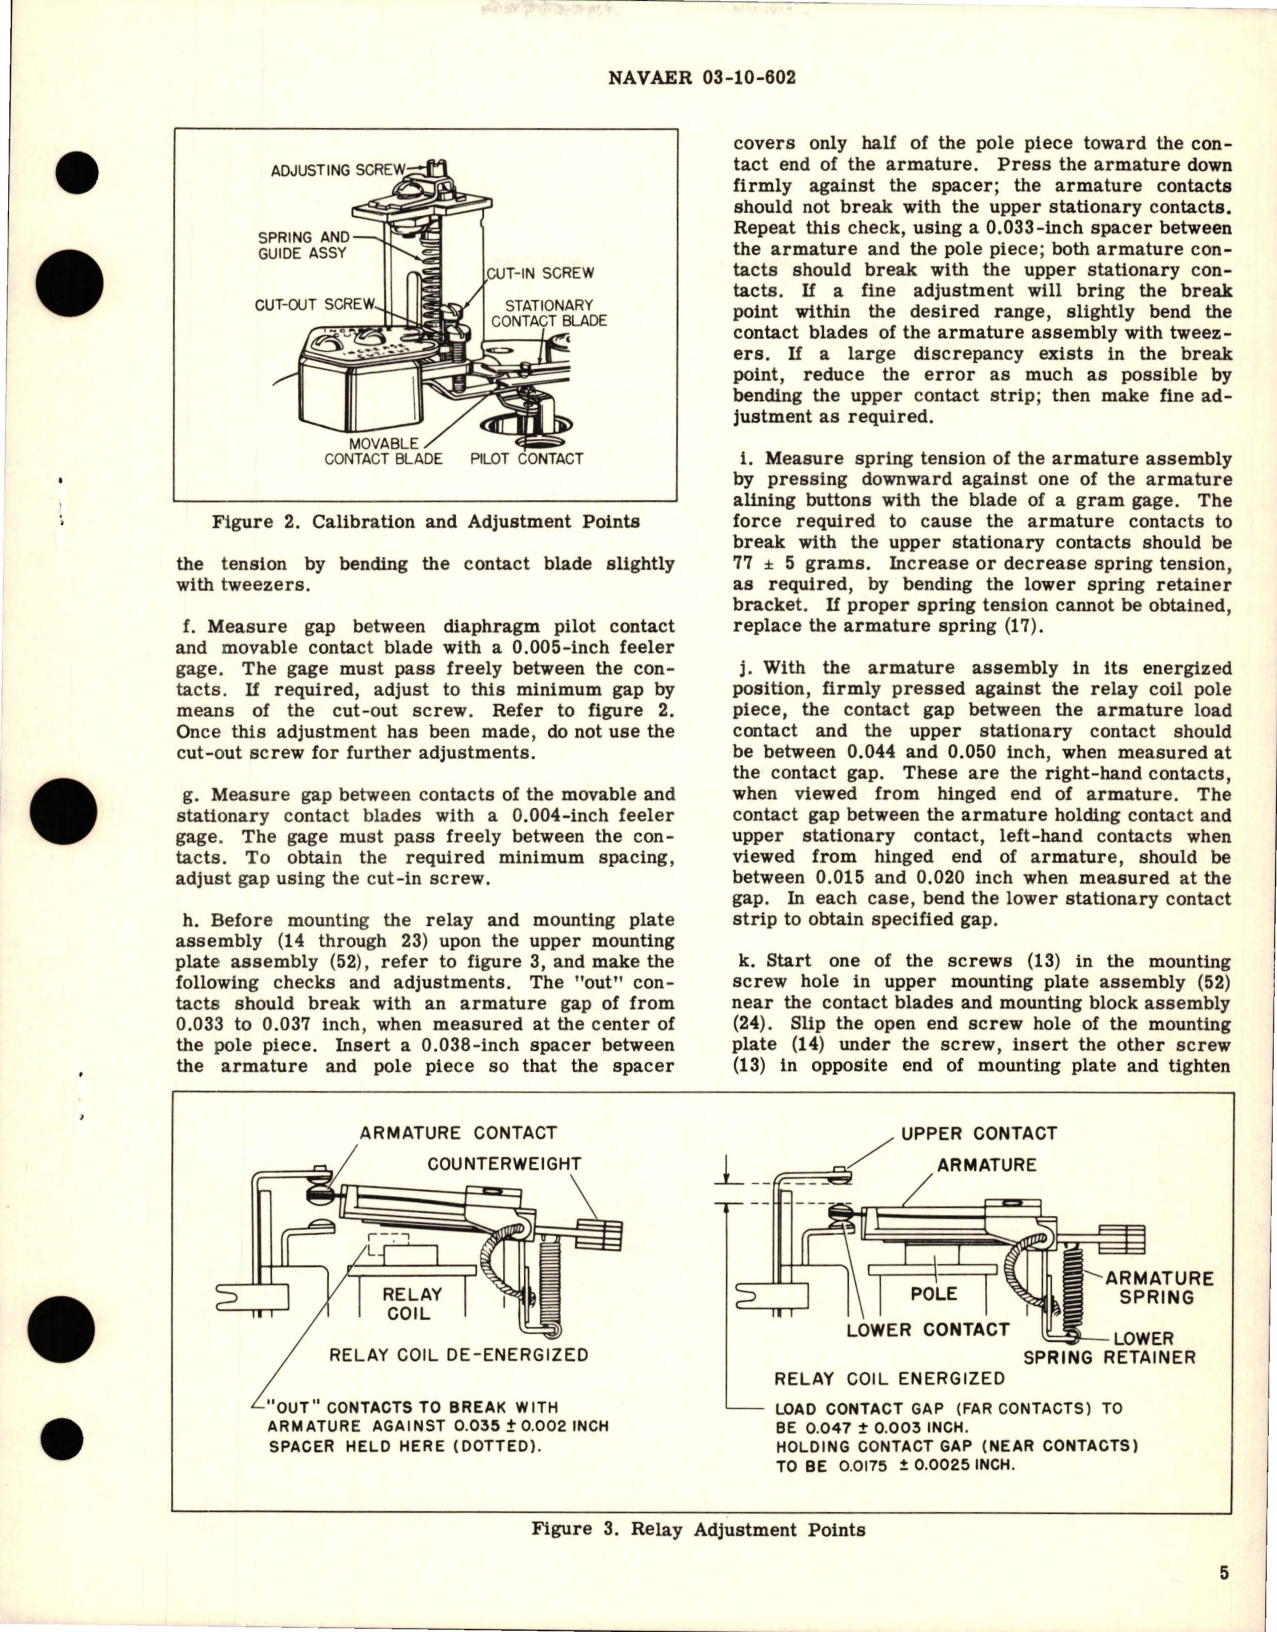 Sample page 5 from AirCorps Library document: Overhaul Instructions with Parts Breakdown for Differential Air Pressure Switch - Type PG214B